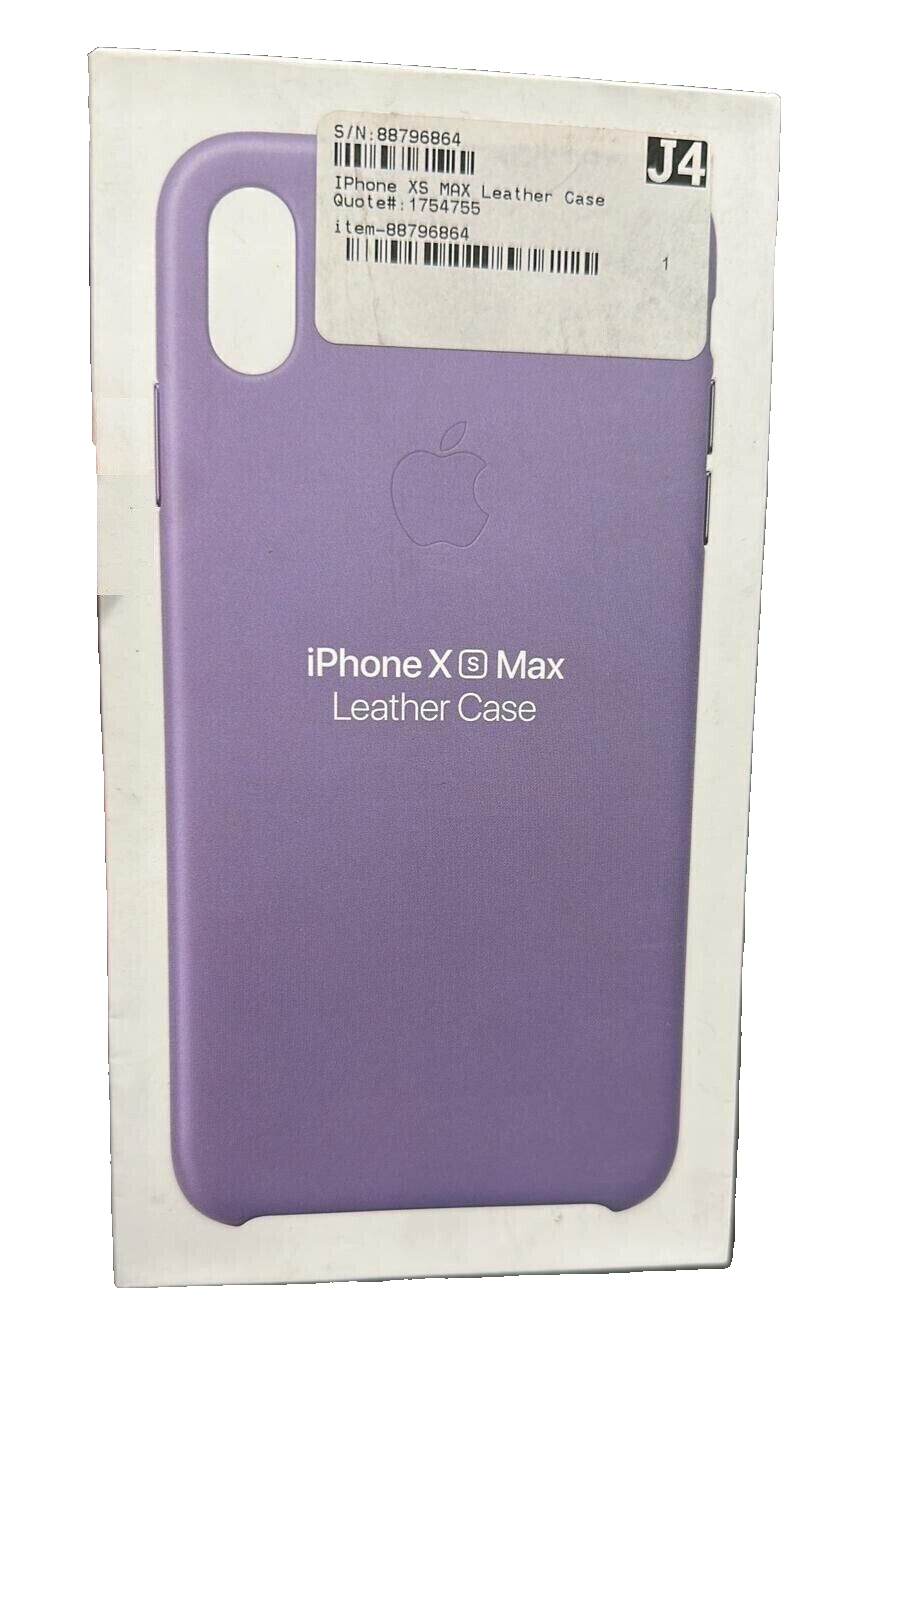 Primary image for Genuine Apple iPhone XS Max Leather Case MVH02ZM/A - Lilac Purple